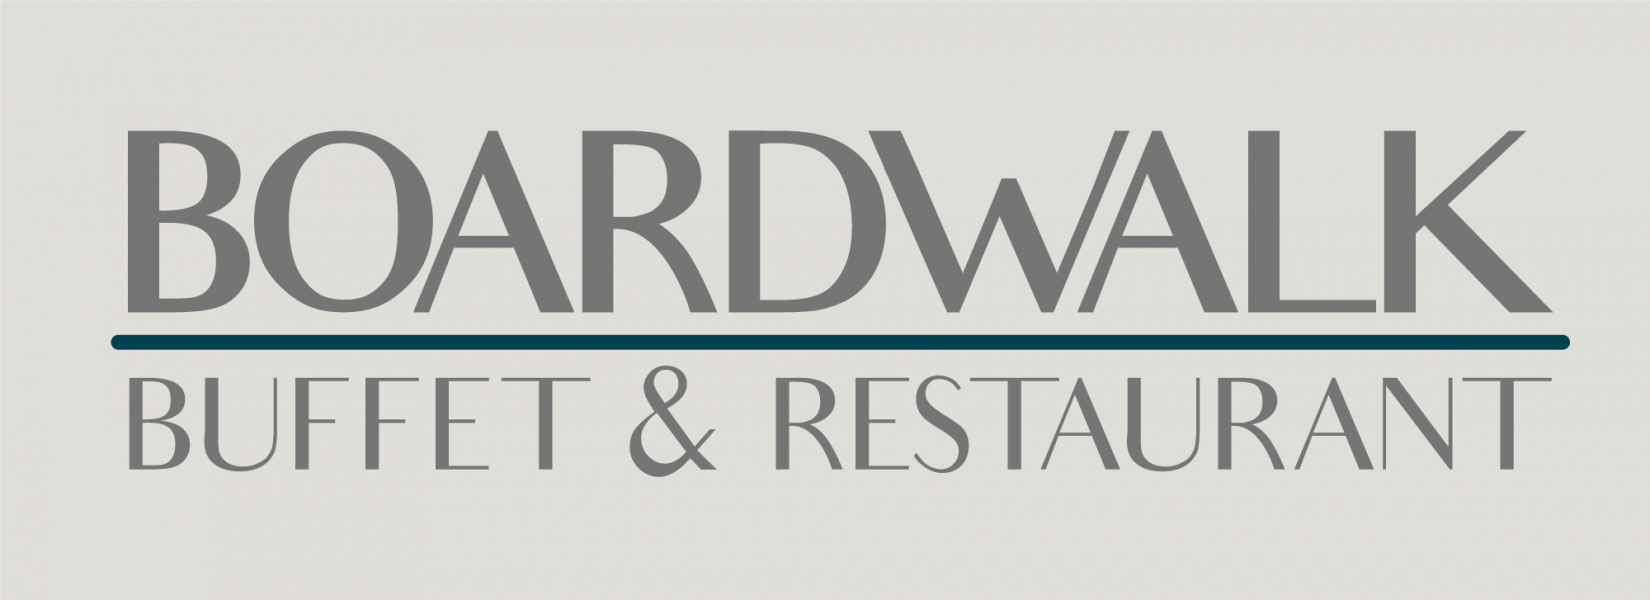 Boardwalk Buffet Logo High-Res PNG and EPS vector